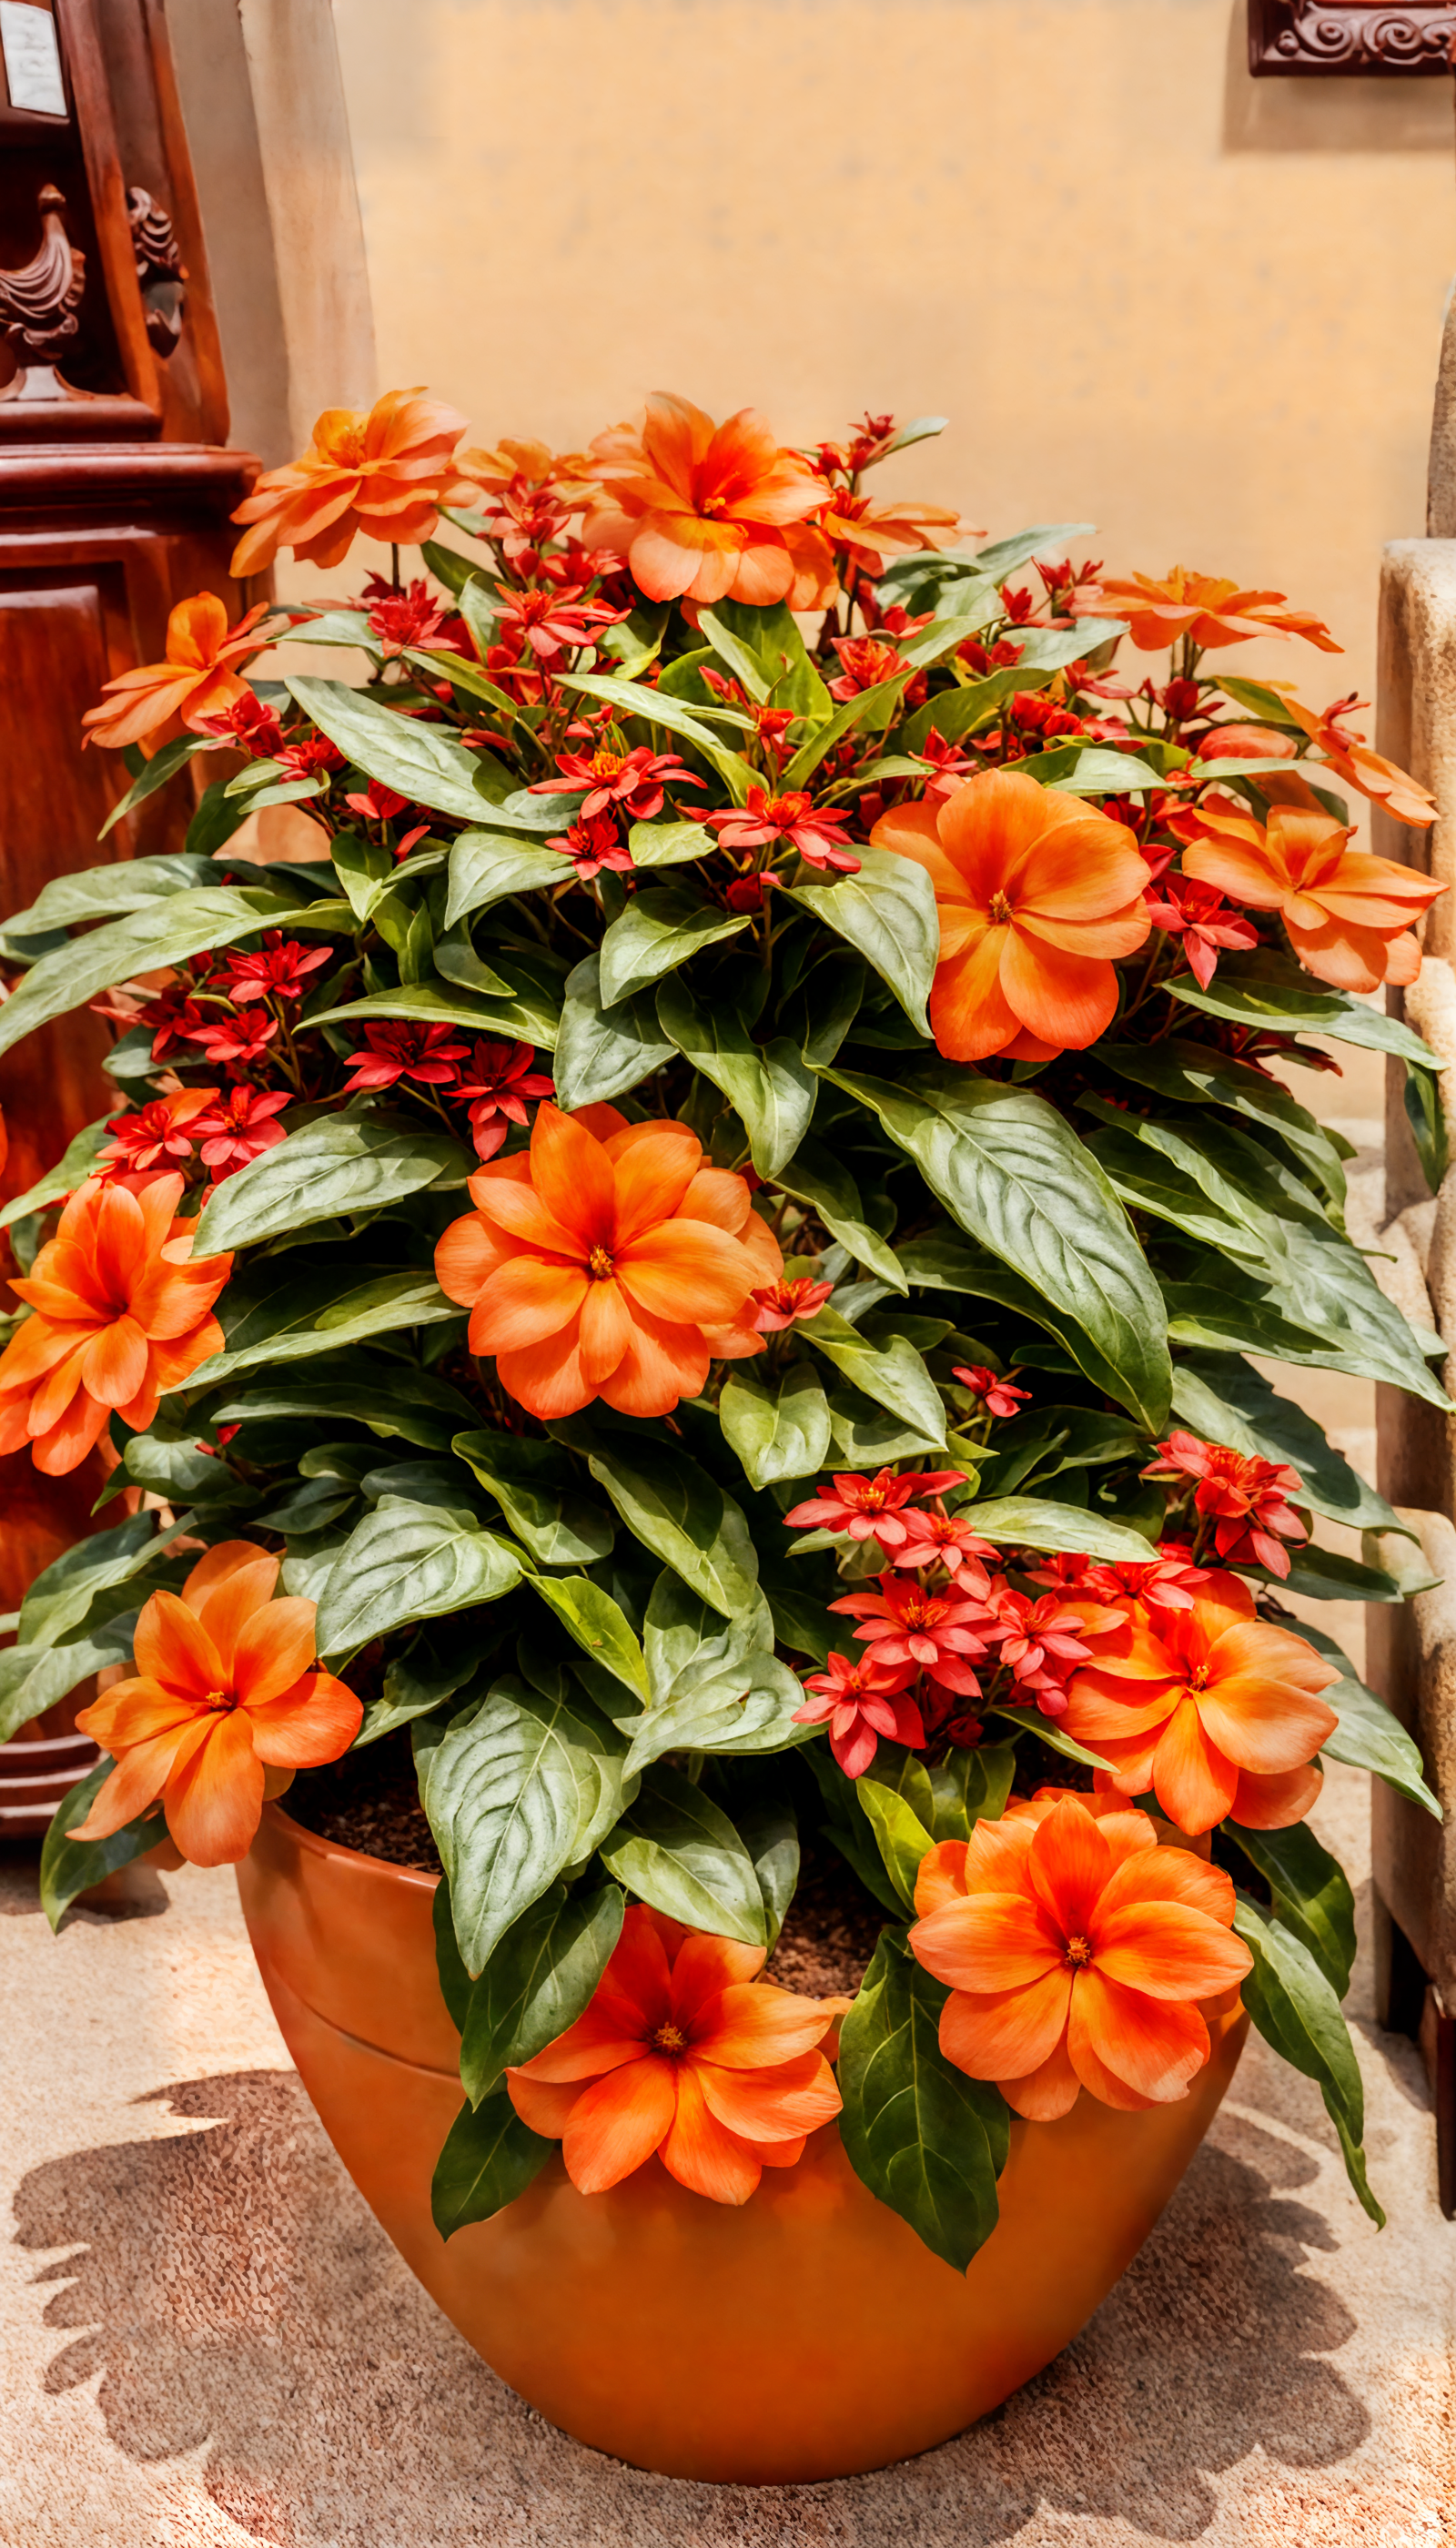 Impatiens hawkeri with vibrant orange flowers in a rustic bowl on a table, indoor setting.